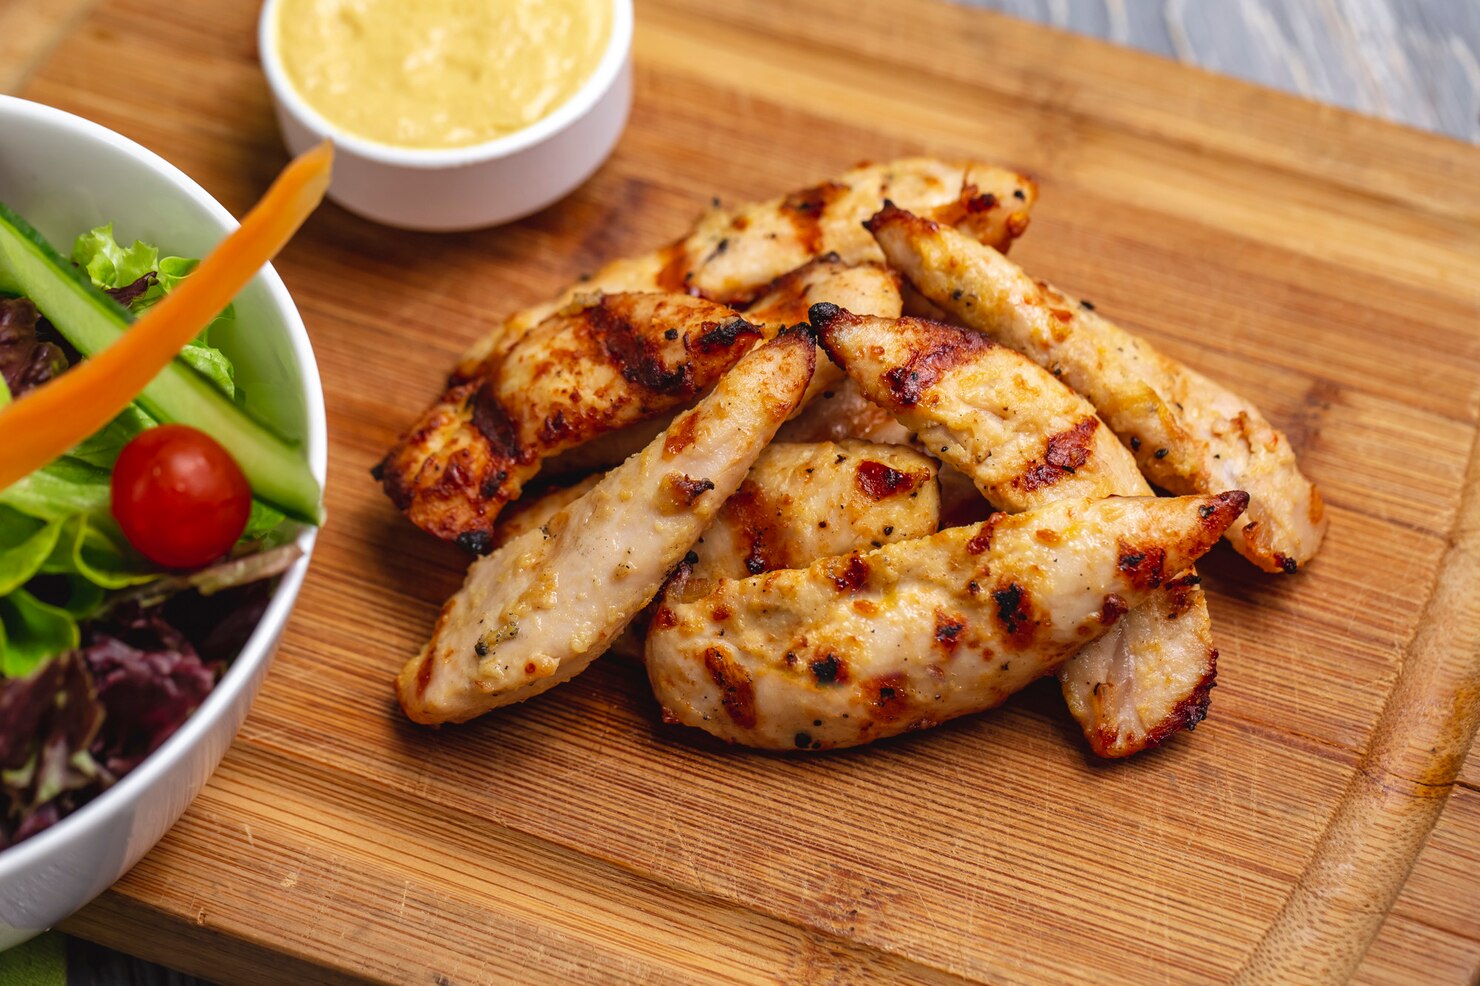 calories in grilled chicken breast